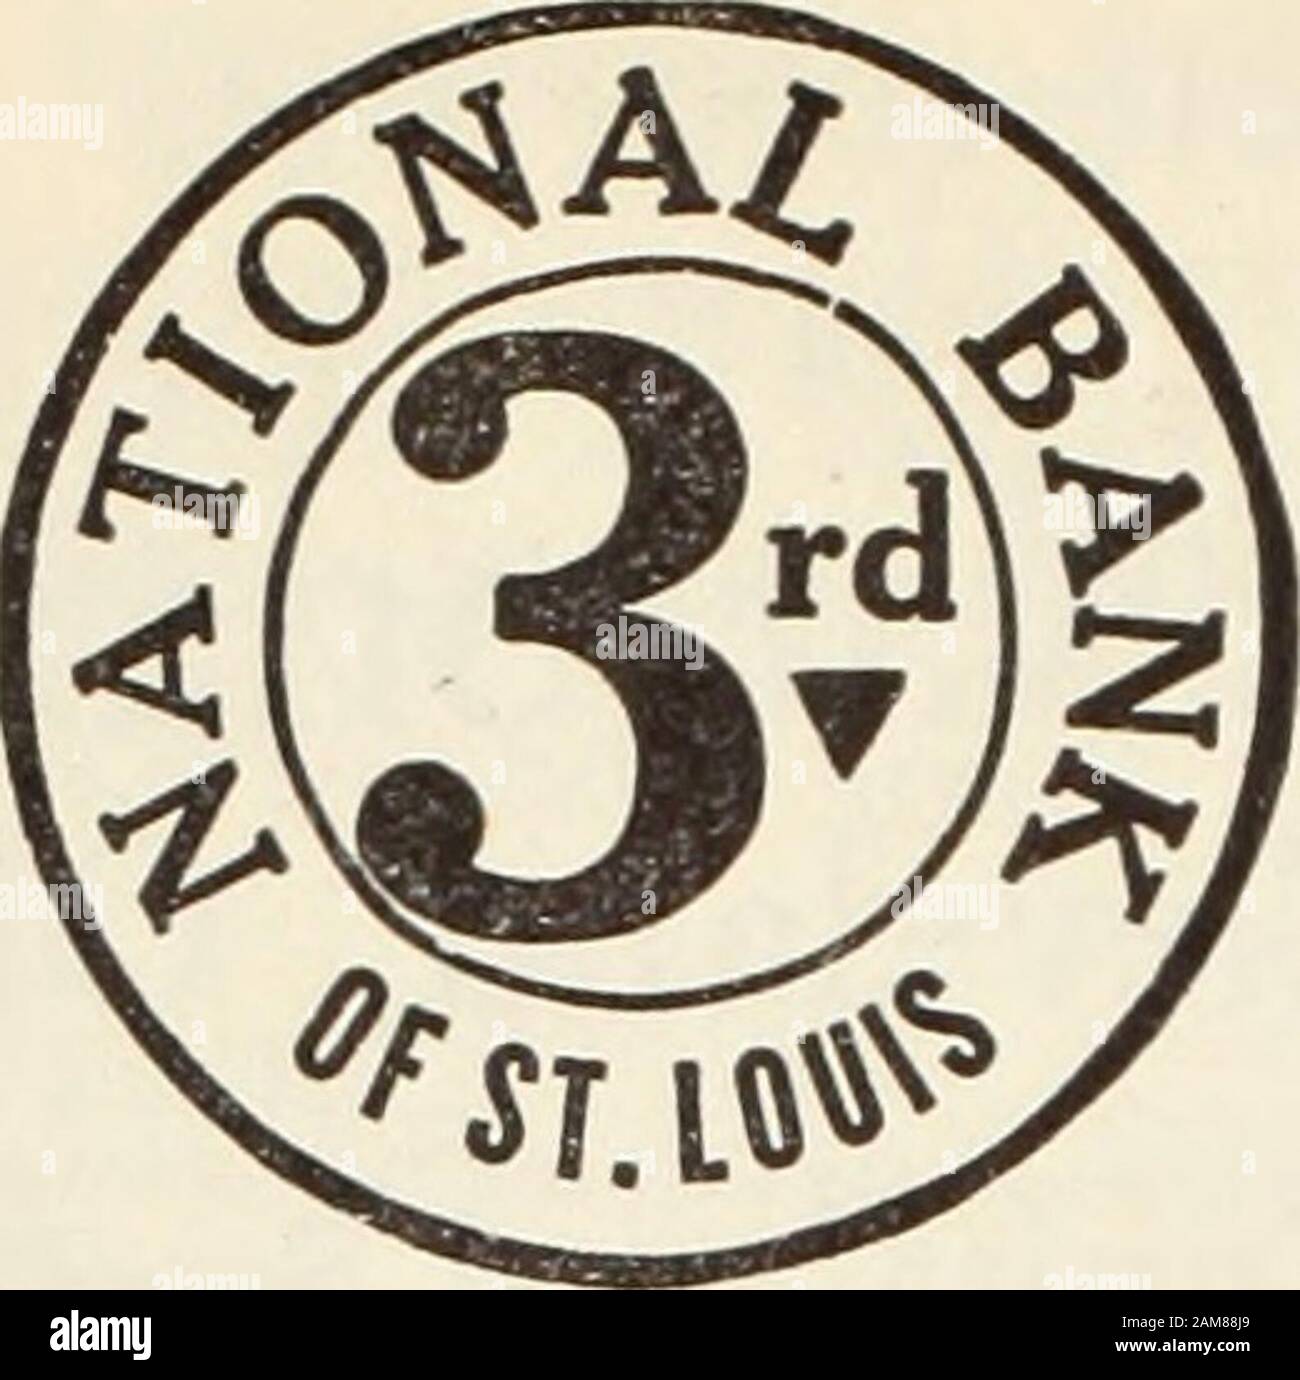 The Commercial and financial chronicle . askaand the Northwest 14 Mechanics -American National Bank St. Louis. Report of Condition March 7 1911. RESOURCES Bills discounted - $16,818,870 54 Demand loans and overdrafts 6.293.074 41 U S. bonds and premium 2,020.000 00 Redemption fund- 100.000 00 Bonds to secure U. S. deposits . 1.092 29 Other bonds... - LII-SSI ?J Furniture and Fixtures --- s, 295,252 52 Cash—With banks $7 704.928 17 In vaults 7,249.087 77  14.954,015 94 $41,280,040 45LIABILITIES Capital stock $2,000.000 00 Surplus and profits 2,983.152 47 Circulation- - 1,984.200 00 Reserved fo Stock Photo